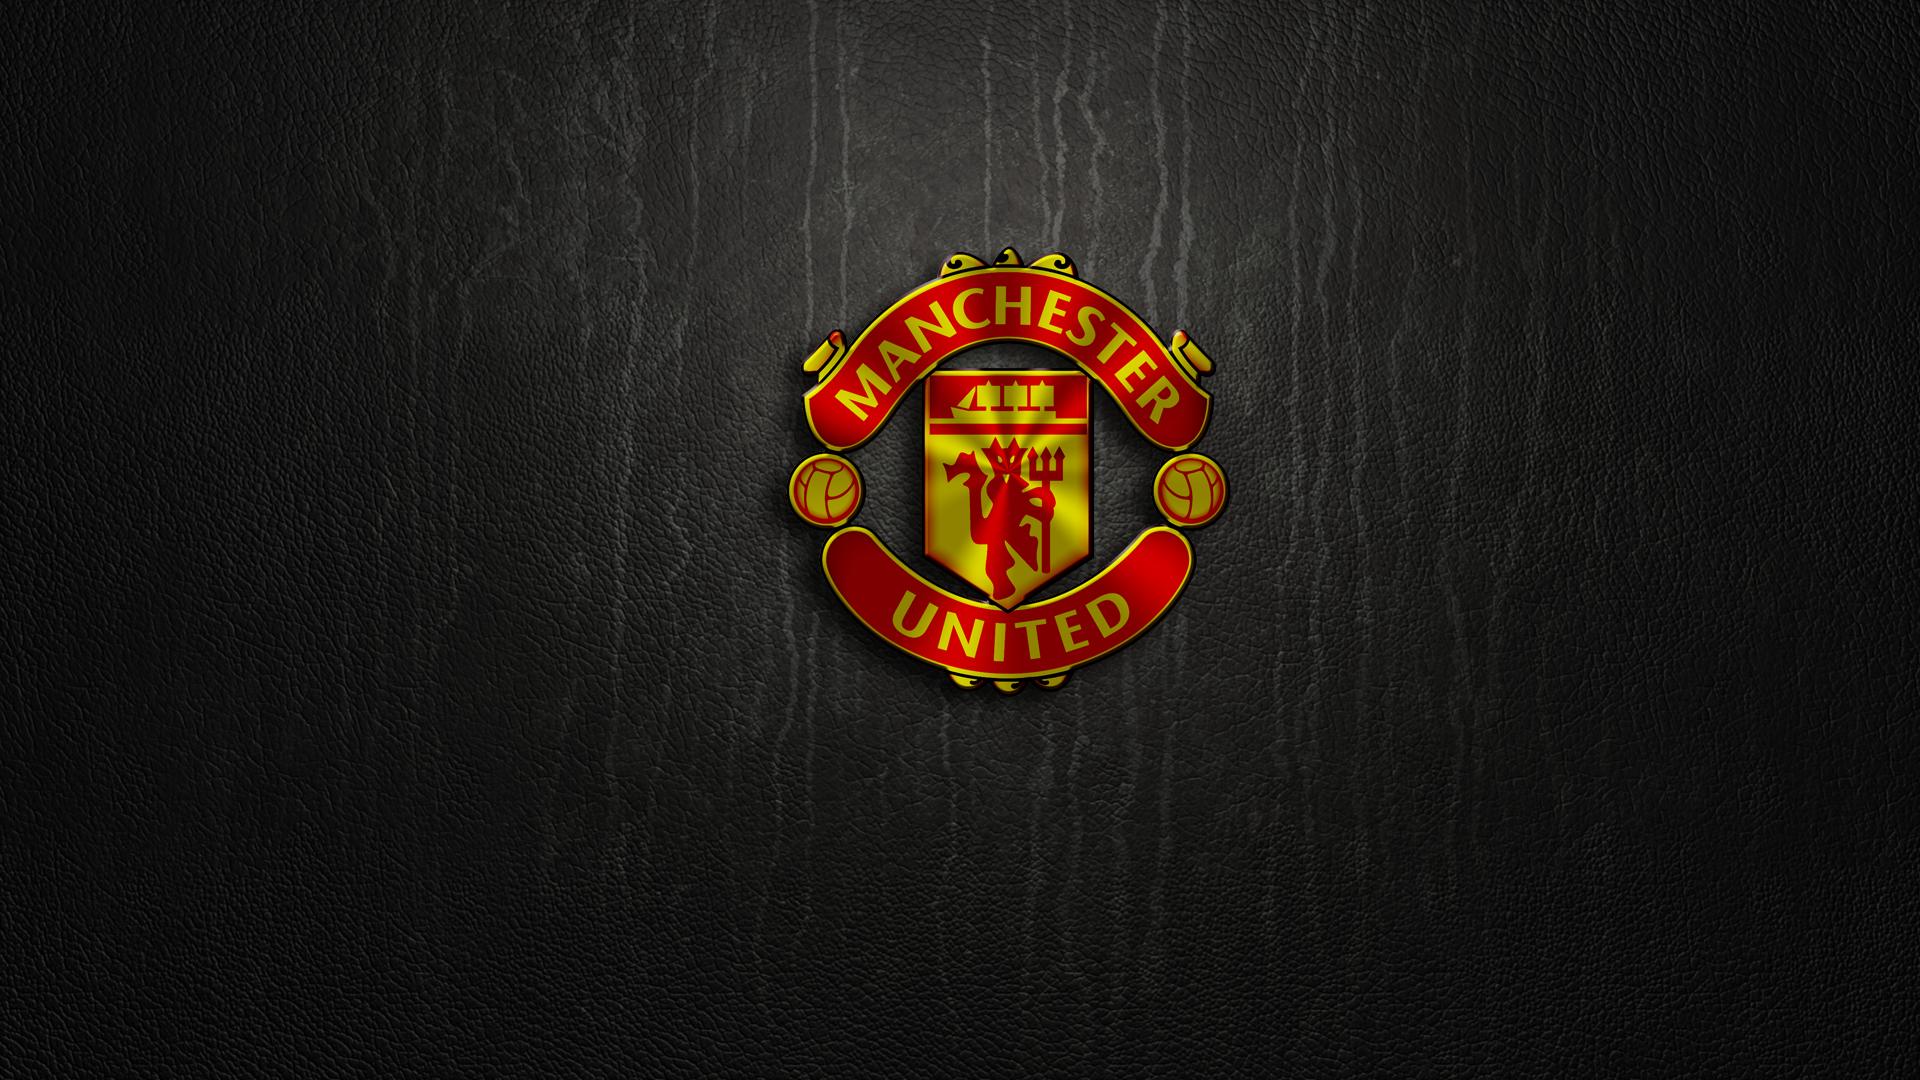 45+] Awesome Manchester United Wallpapers - WallpaperSafari